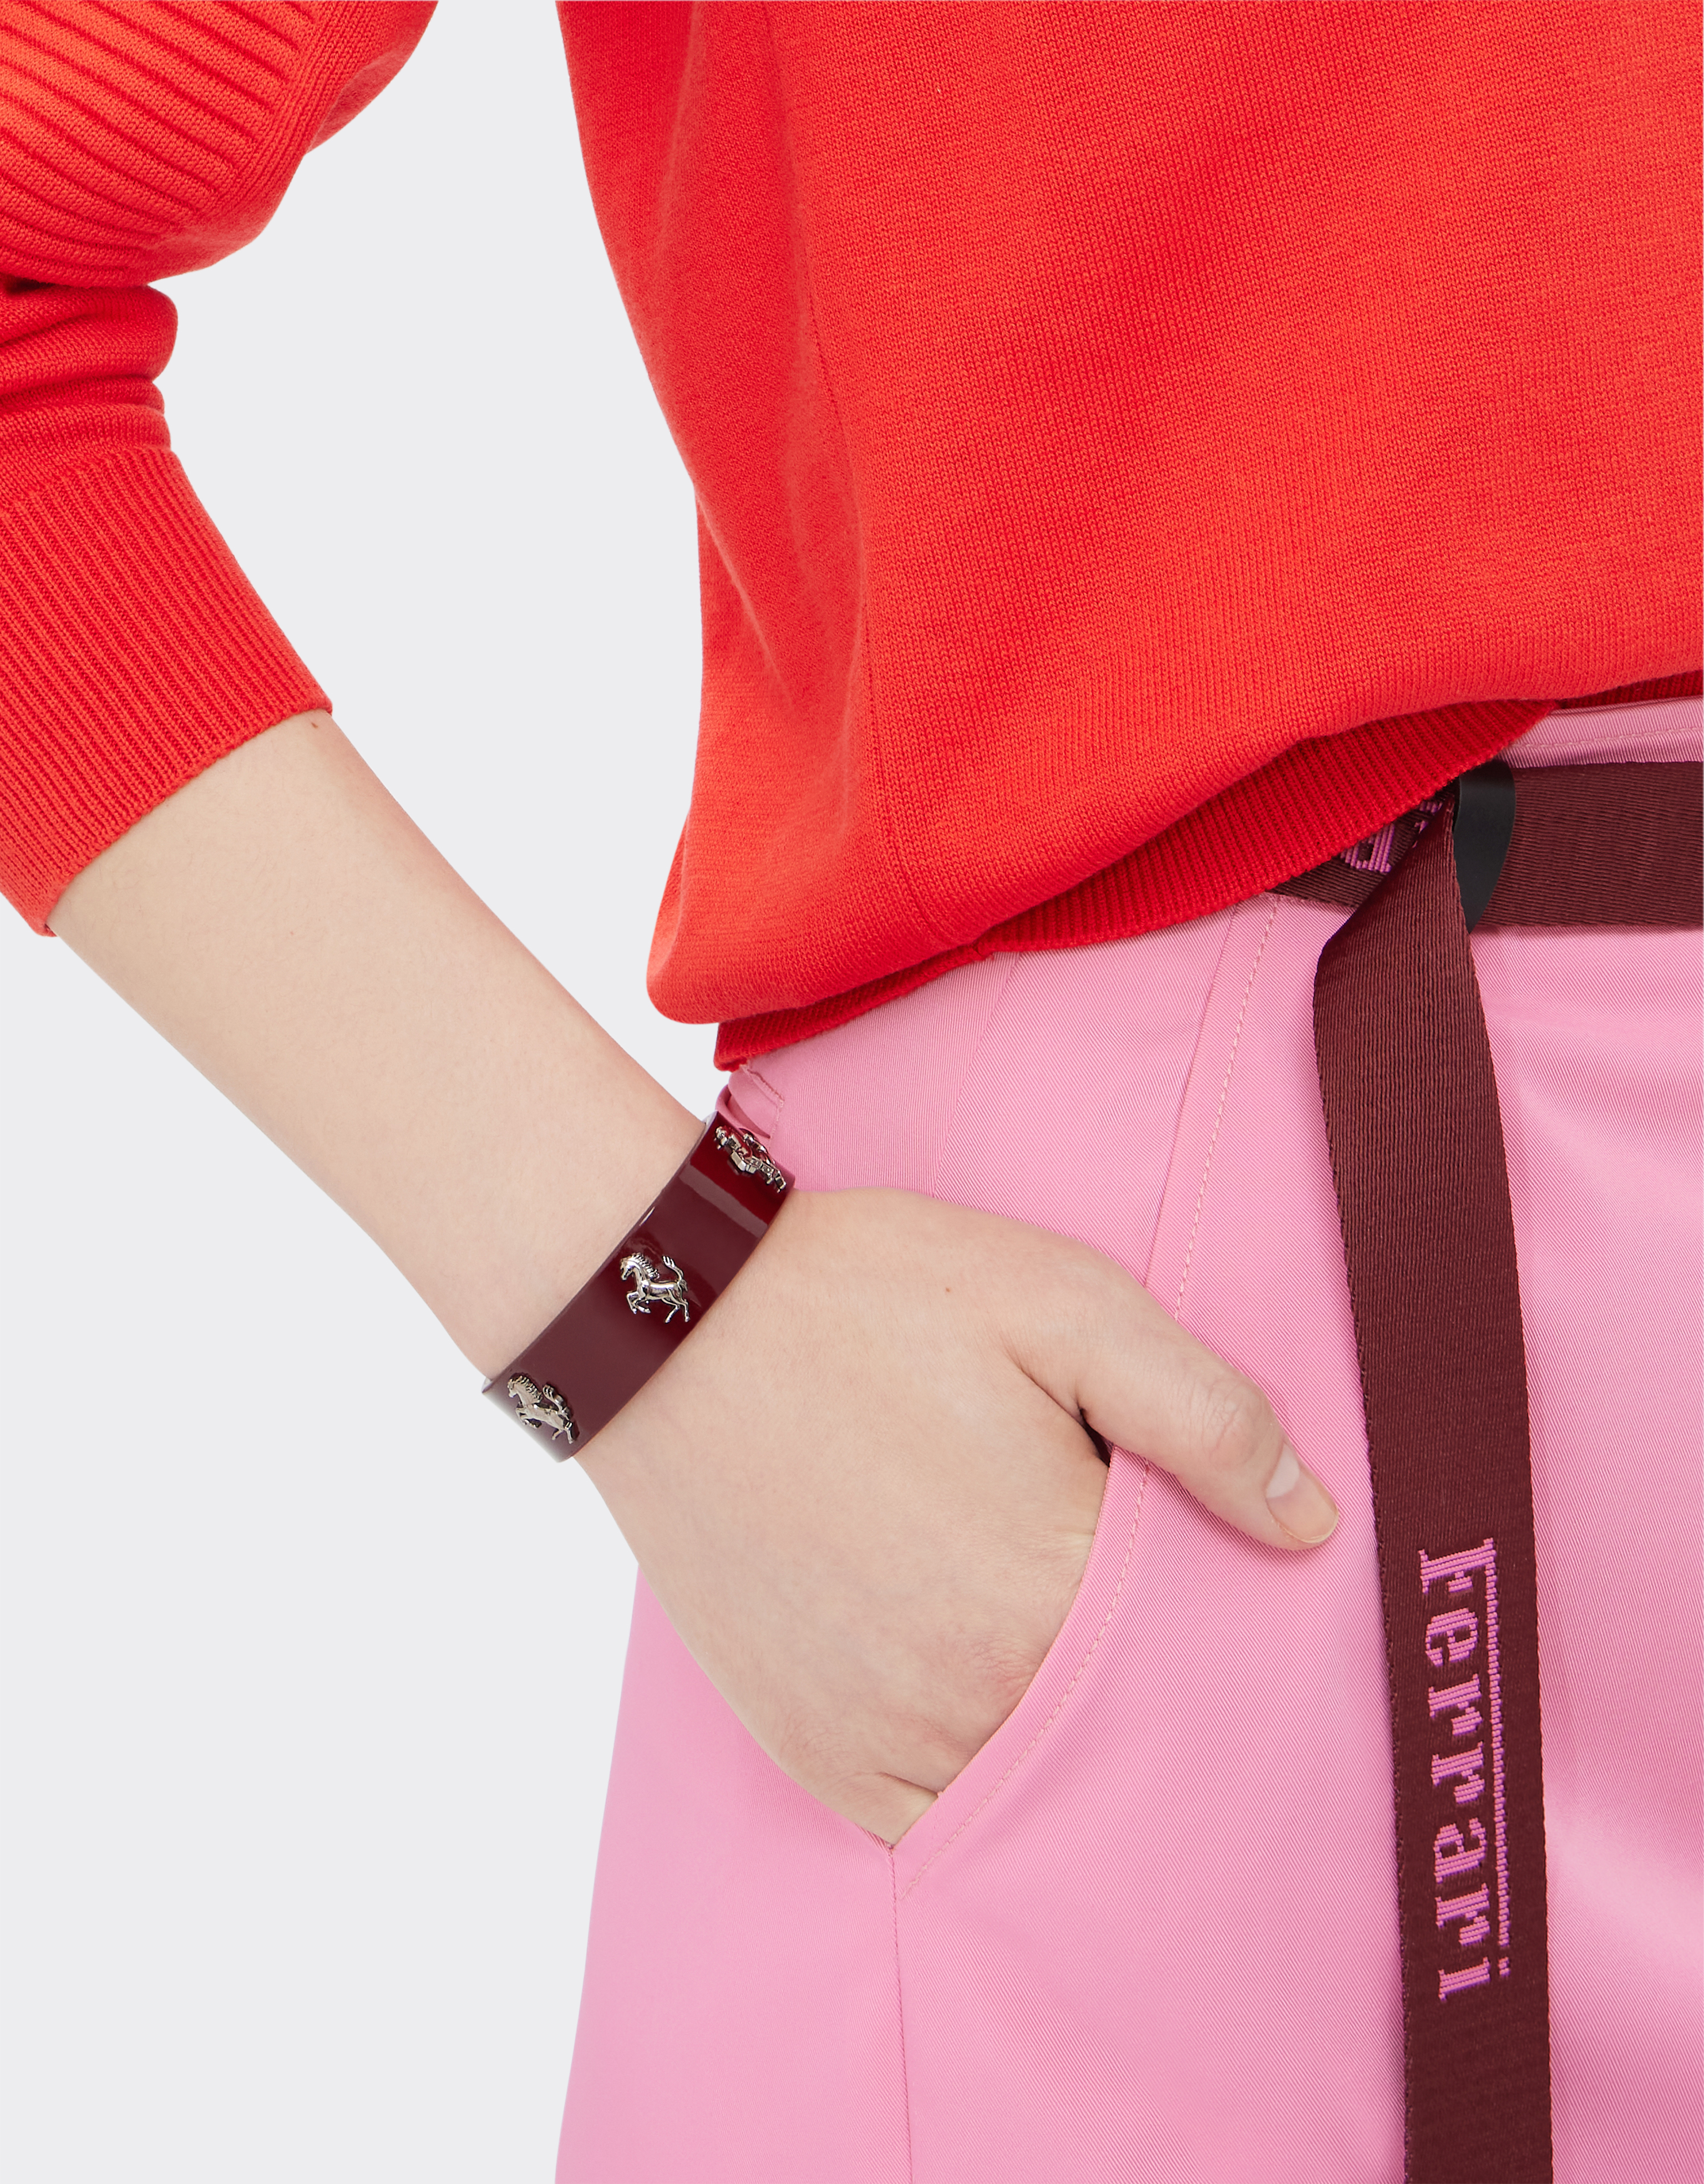 Shop Ferrari Patent Leather Bracelet With Studs In Burgundy